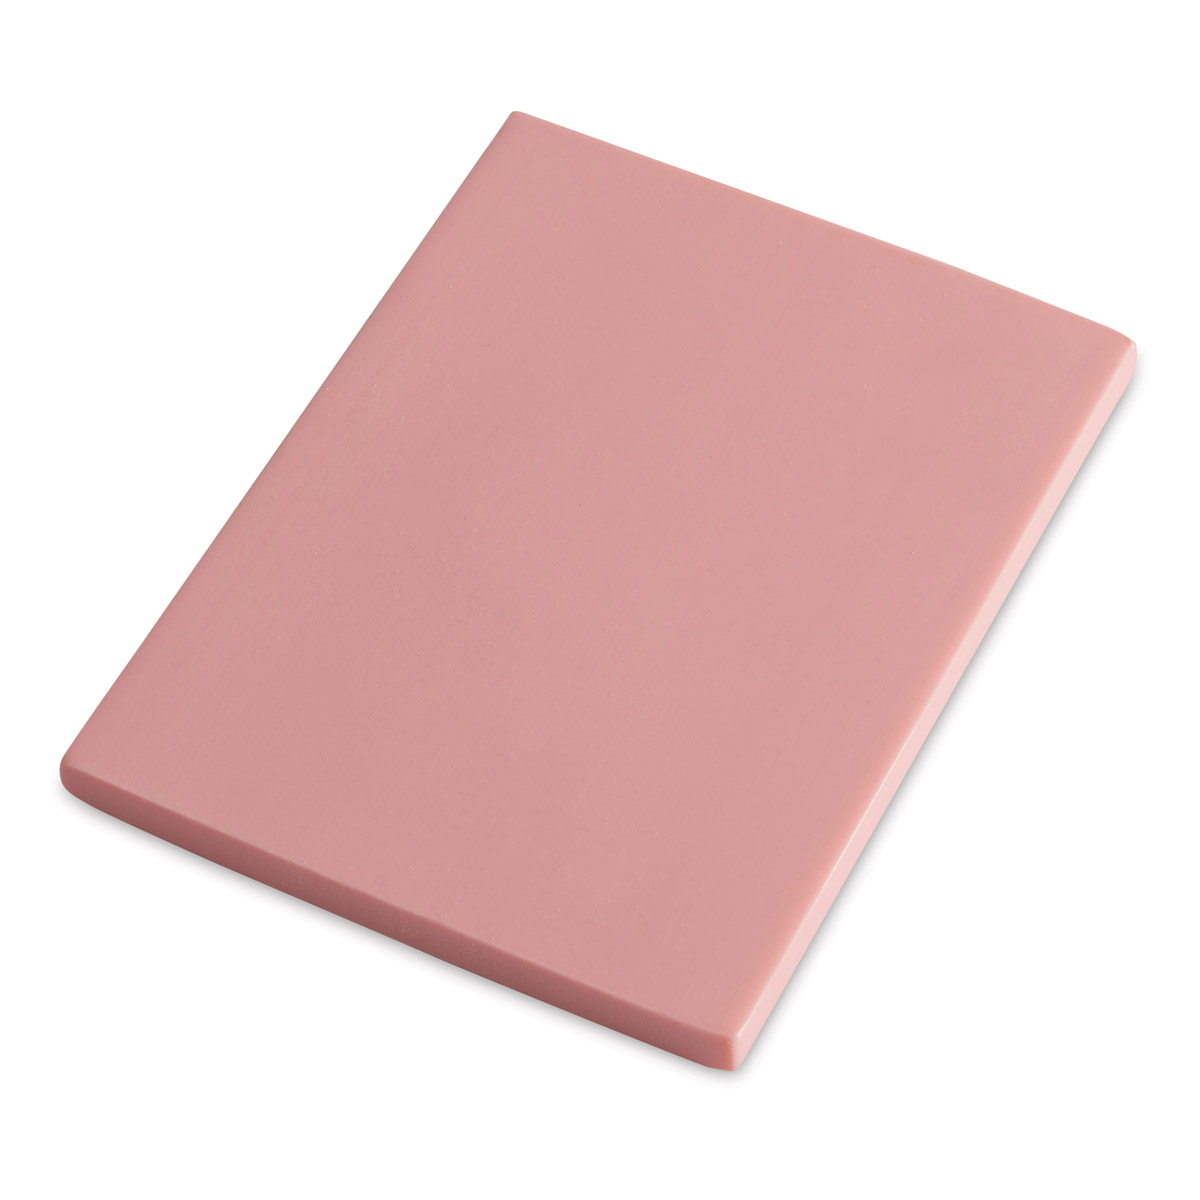  Speedball Speedy-Carve Lino Carving Block, Rectangle, Pink, 9 x  11-3/4 Inches, Linoleum for Printmaking